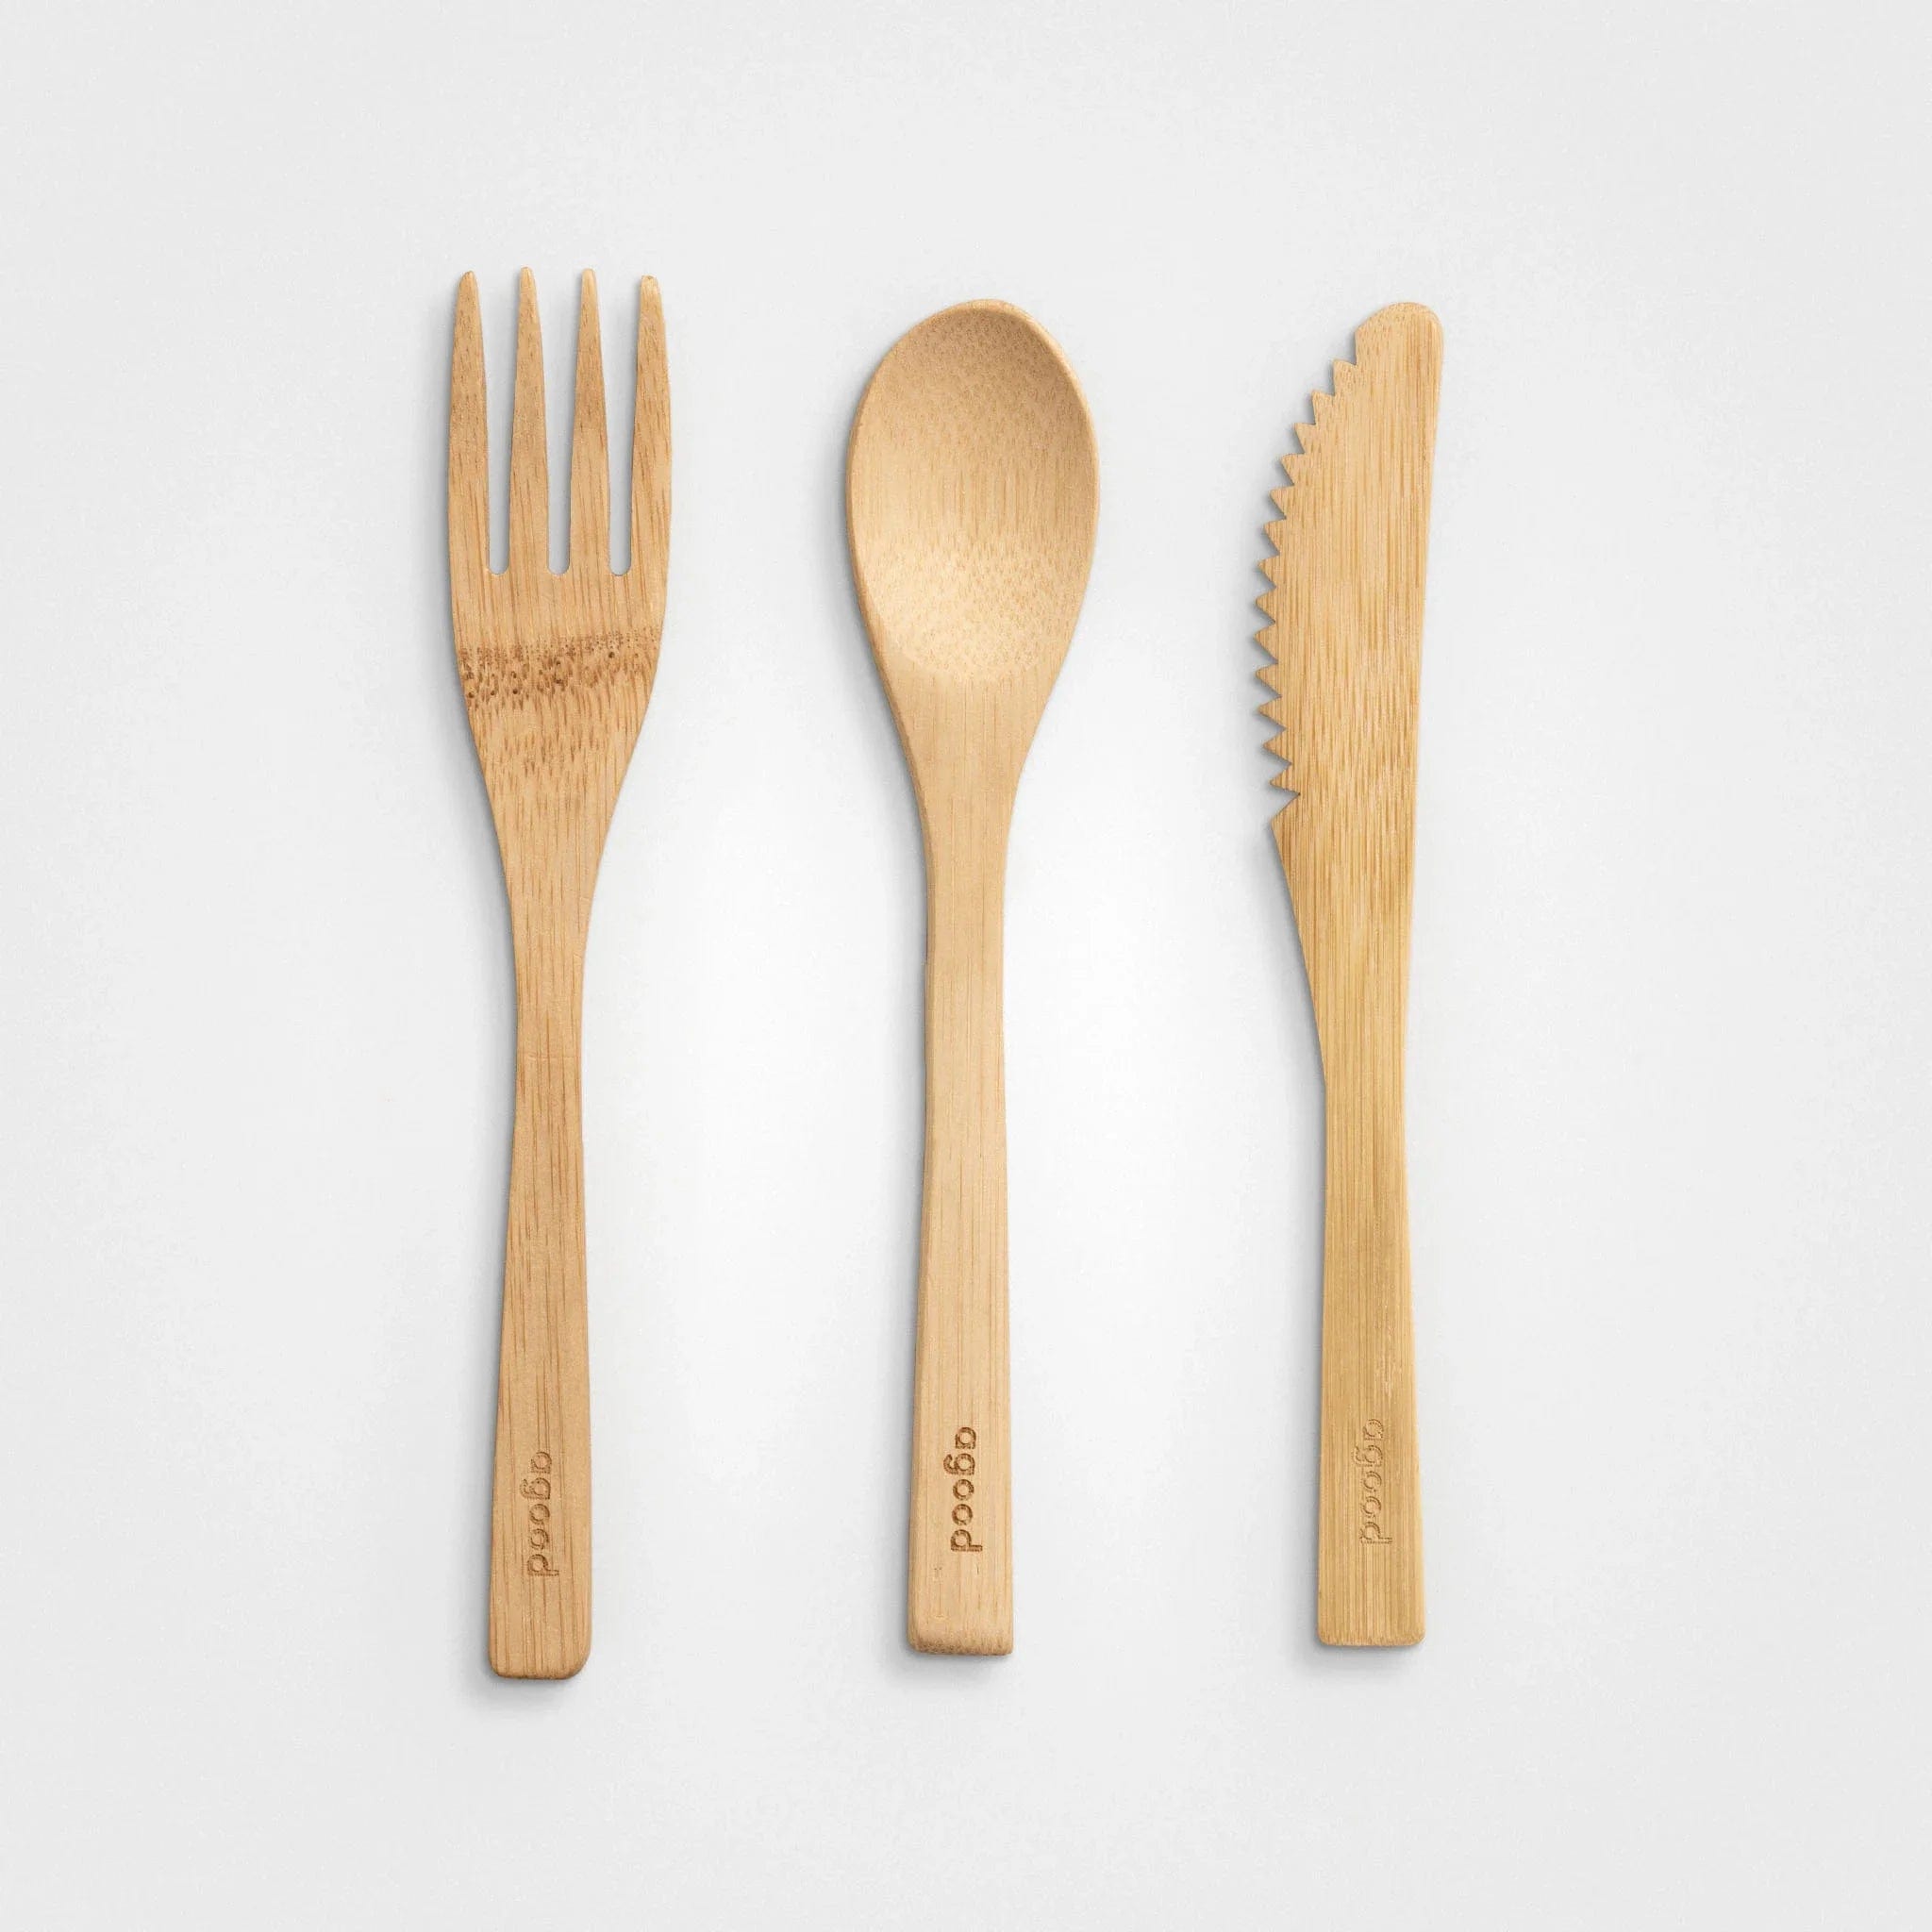 Bamboo Sustainable Material Used for Cutlery